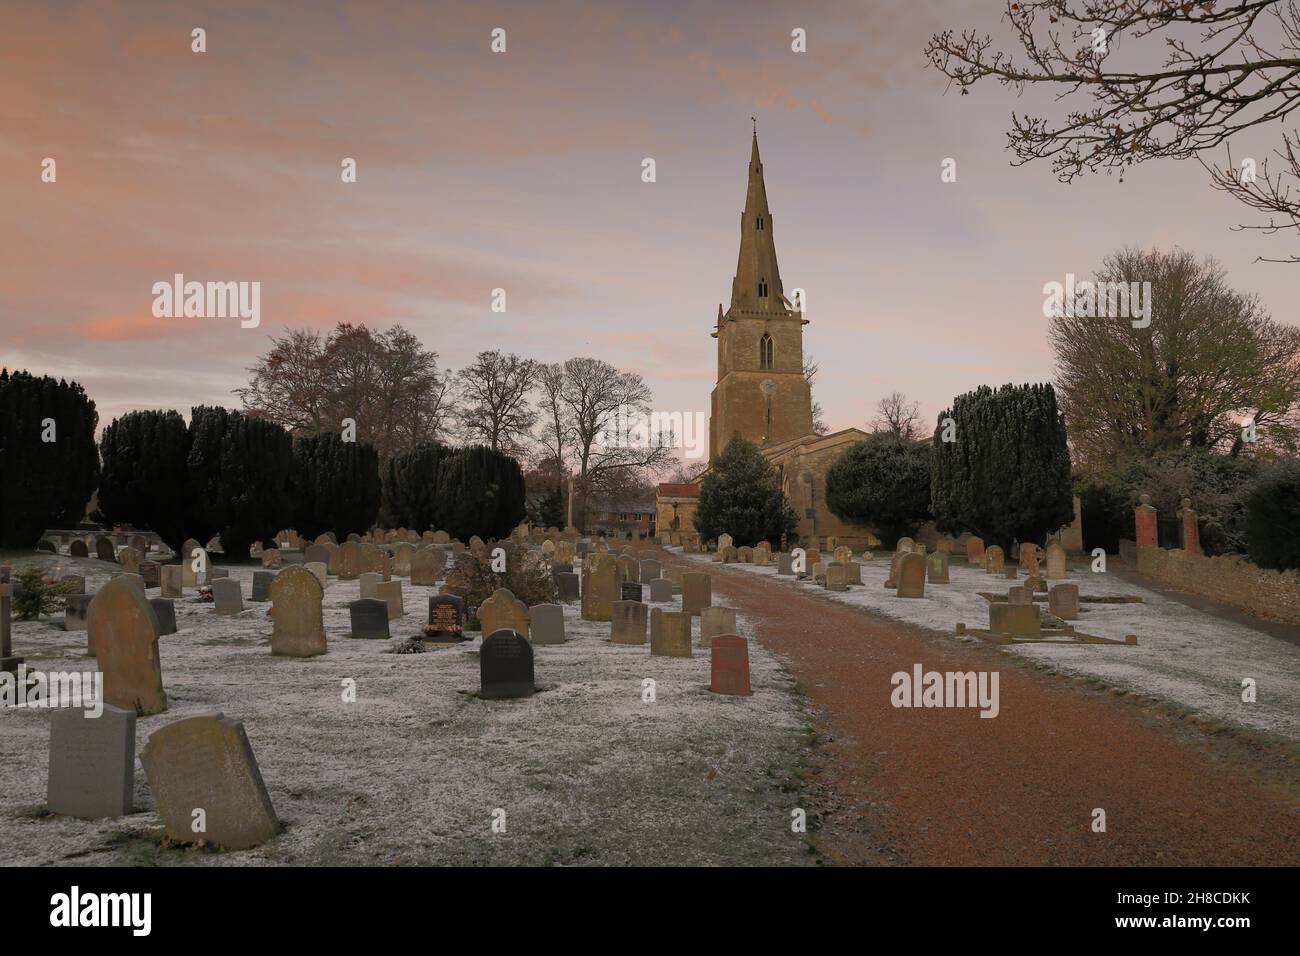 Sharnbrook, Bedfordshire, England, UK - Winter scene of old village church and churchyard at sunrise with frost and snow Stock Photo